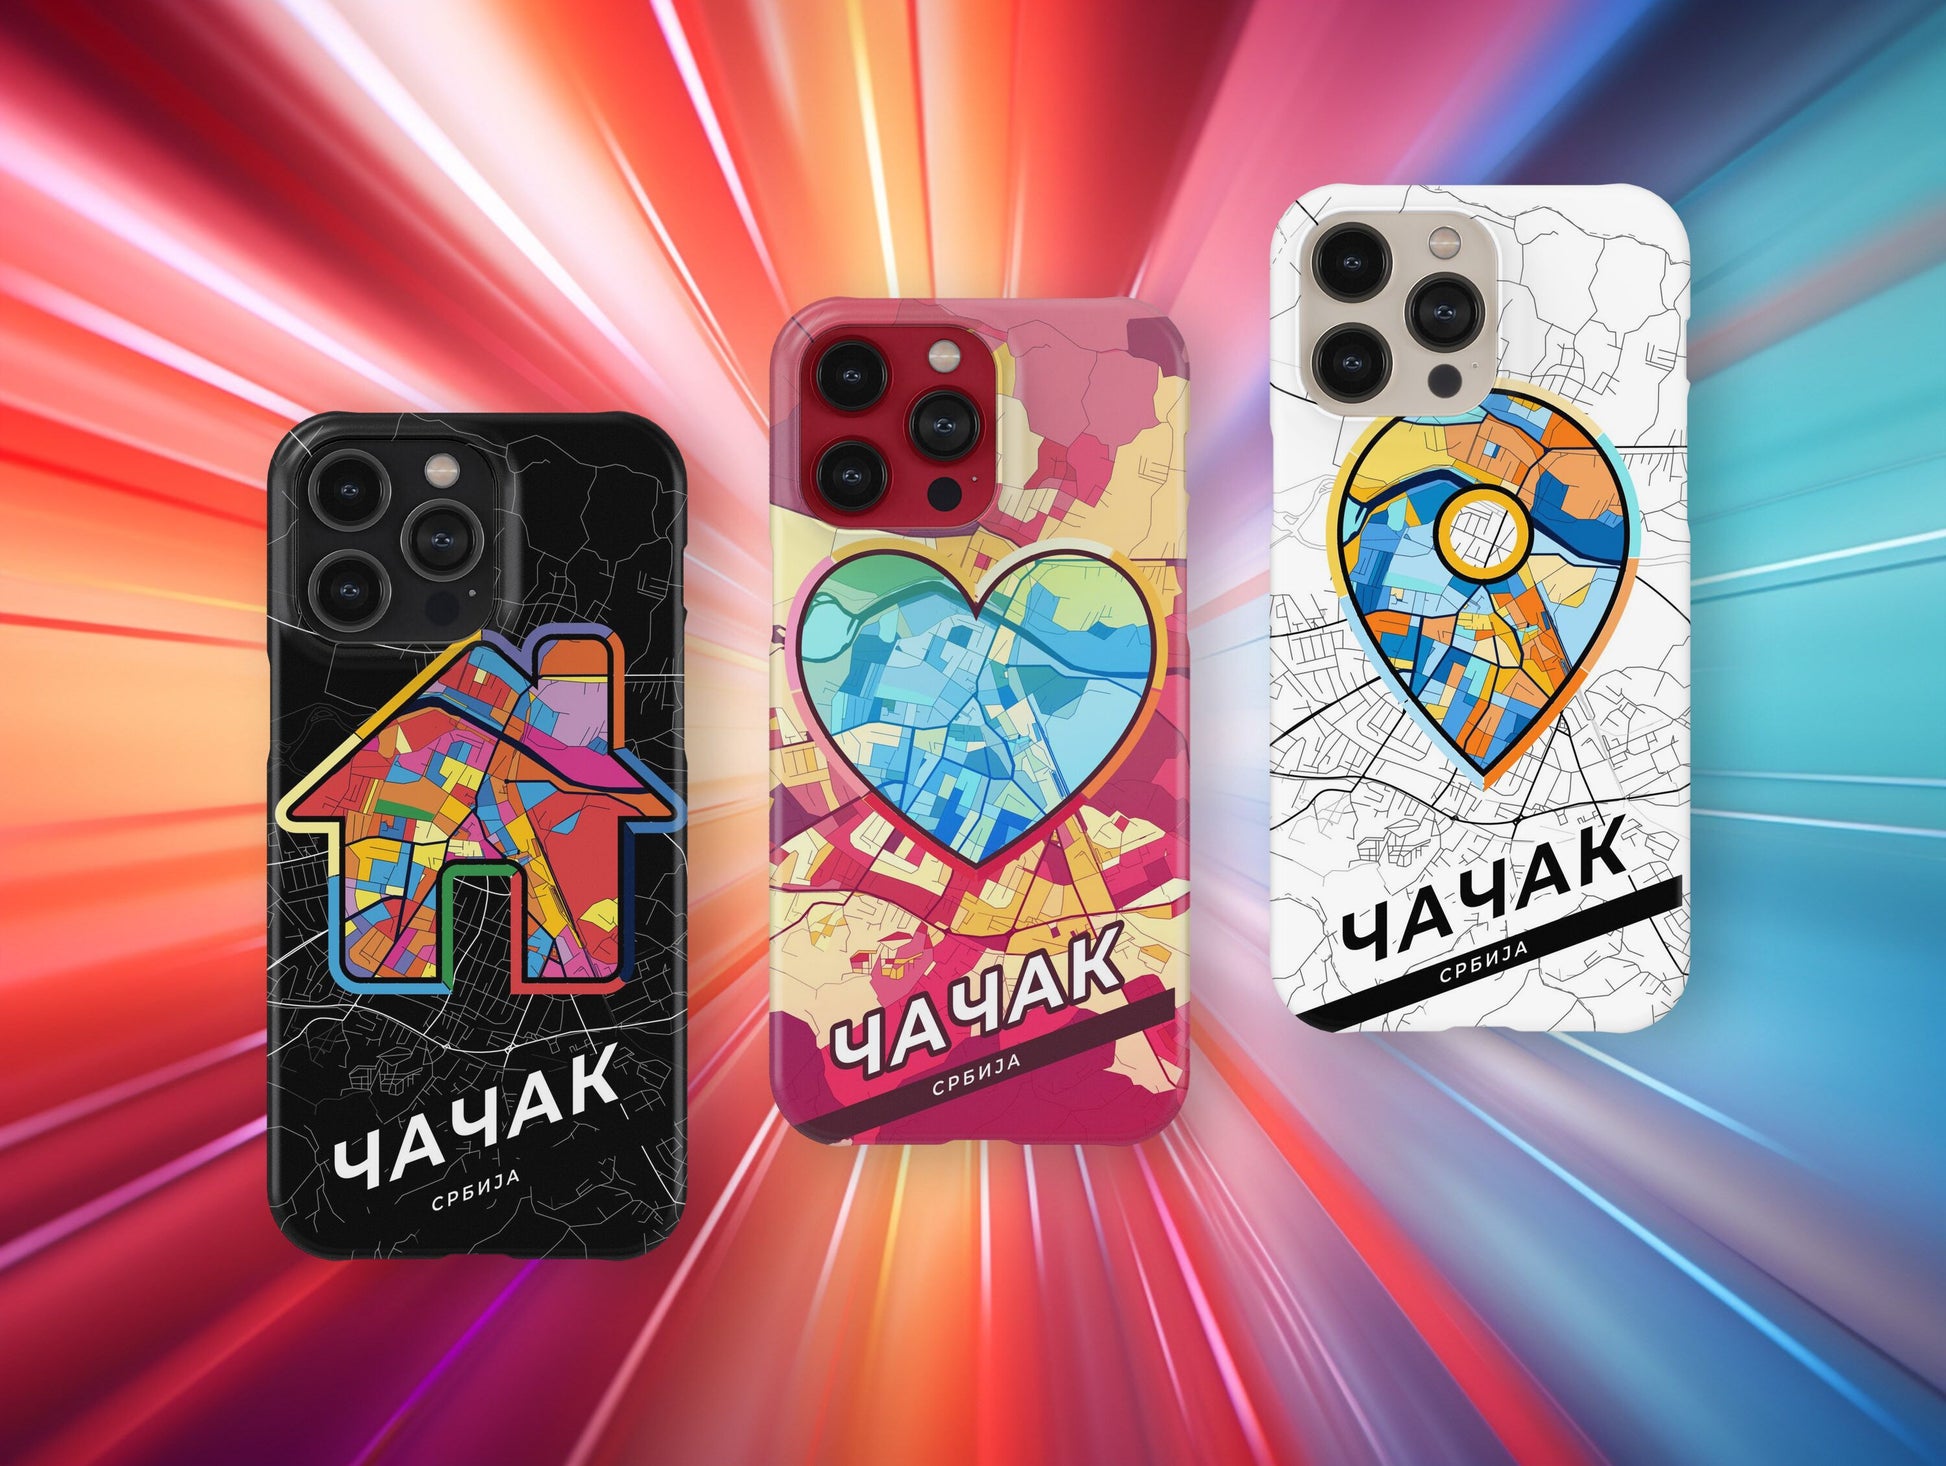 Čačak Serbia slim phone case with colorful icon. Birthday, wedding or housewarming gift. Couple match cases.